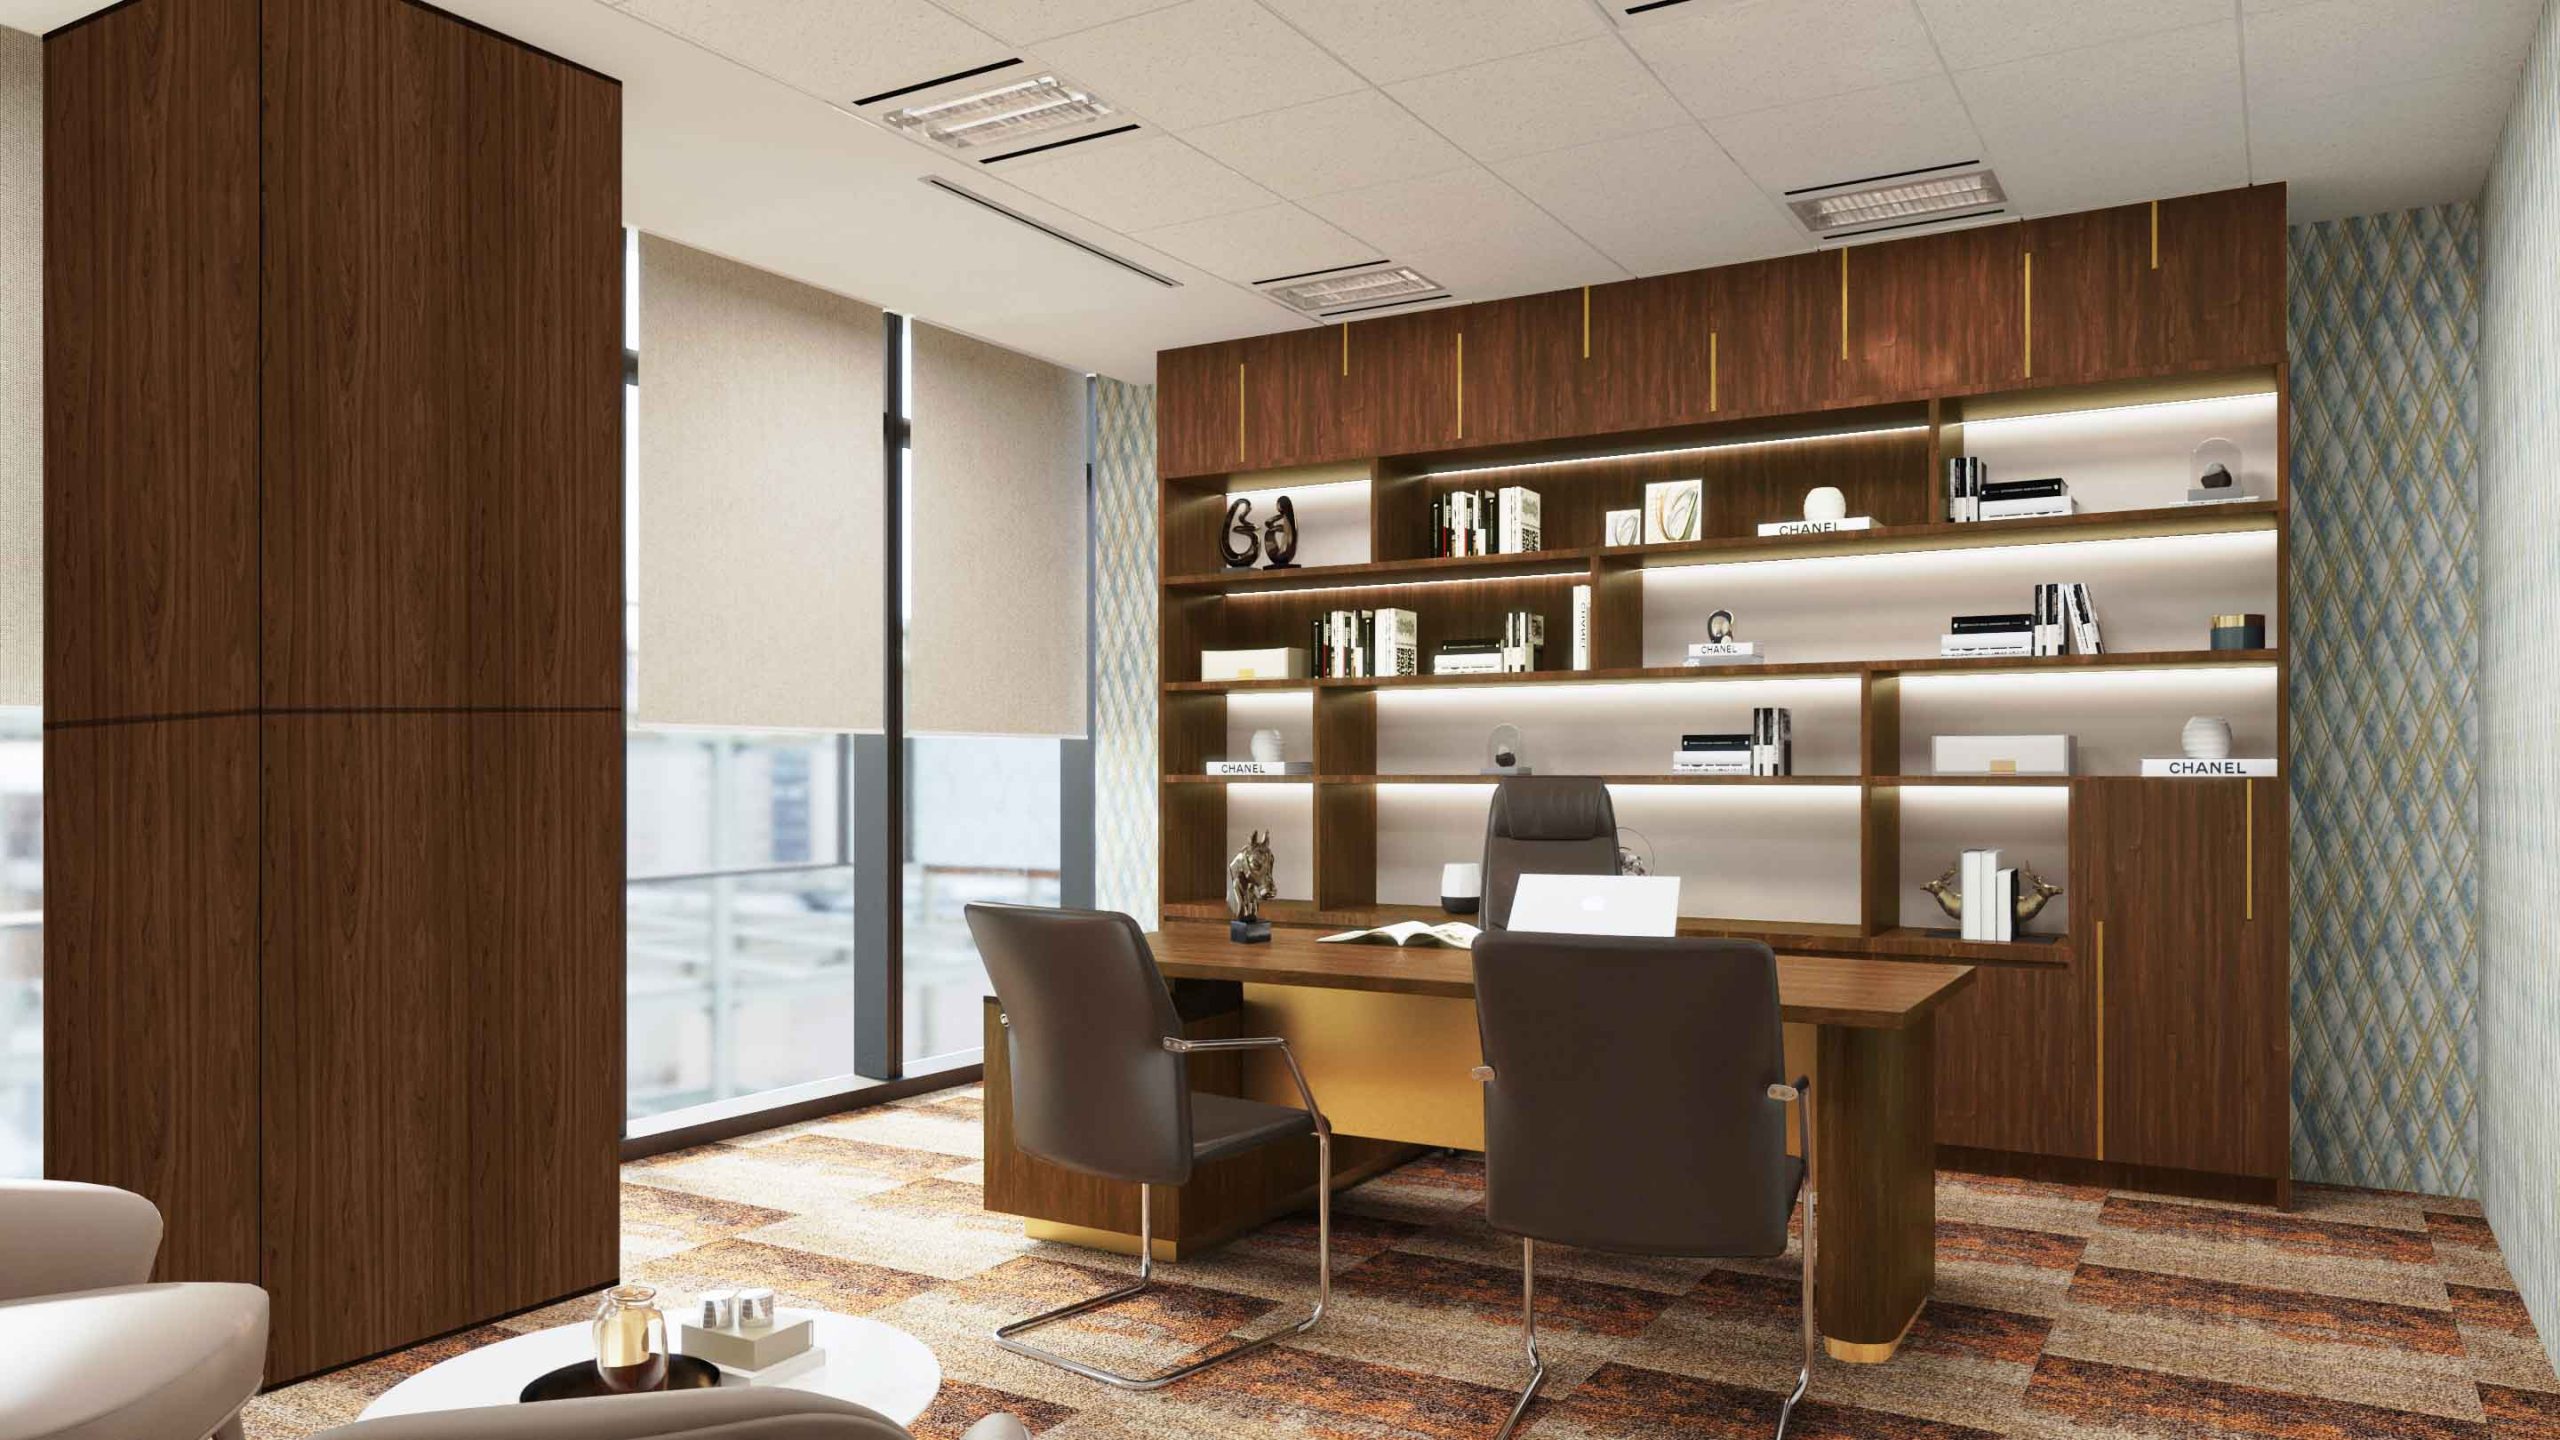 Elegant and functional commercial office design with a touch of Kuala Lumpur's flair by Blaine Robert Design